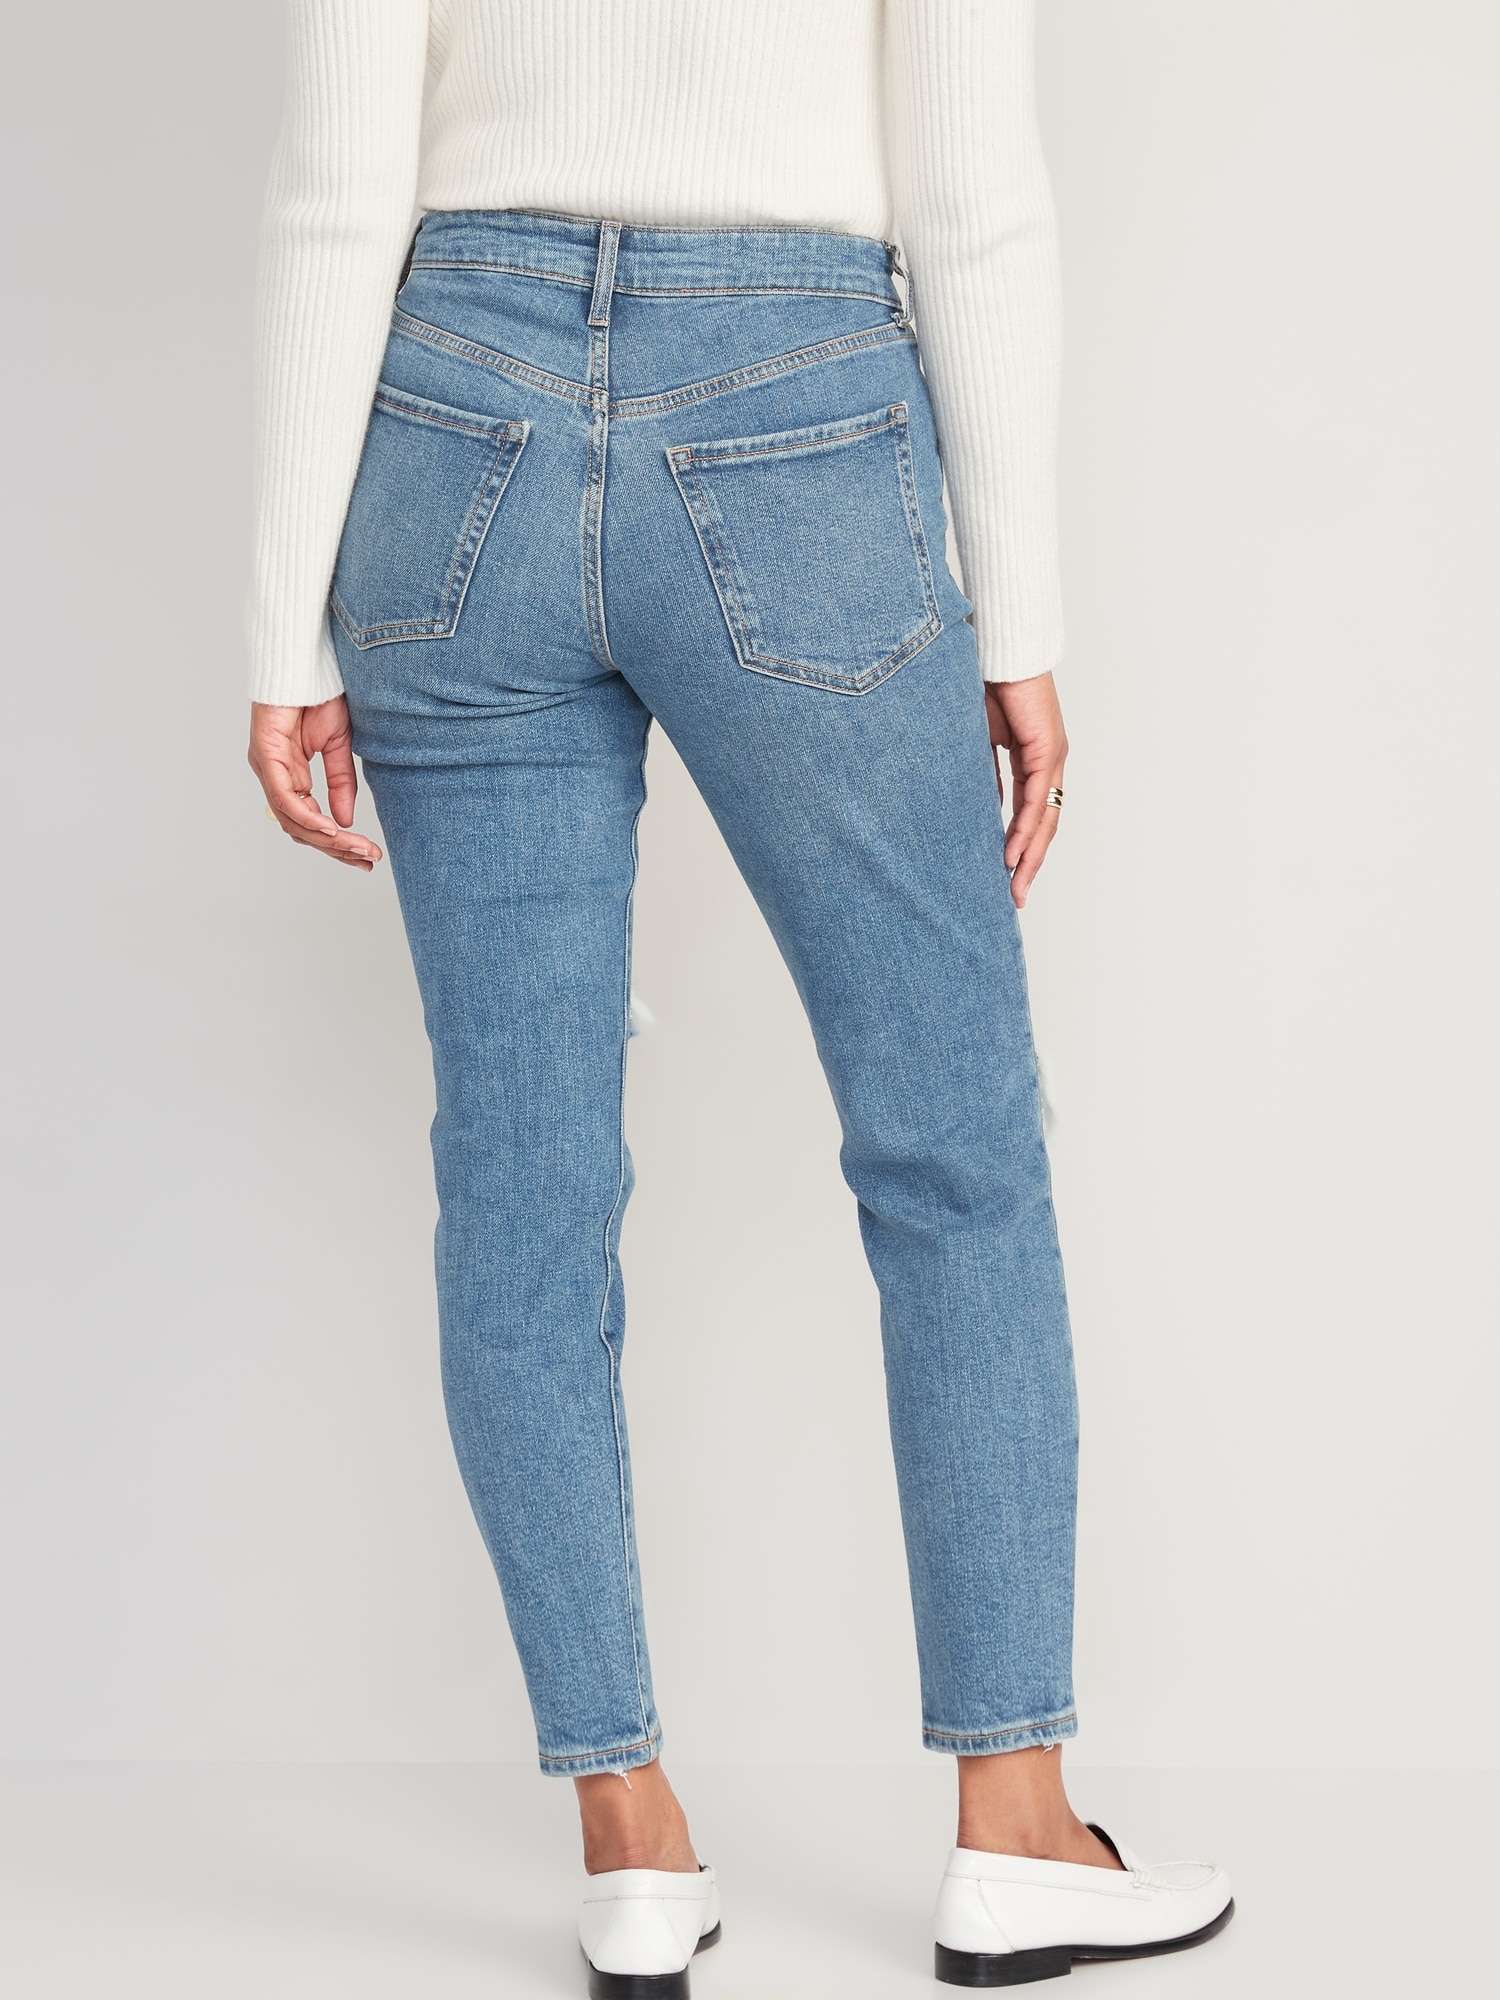 Old Navy Women's High-Waisted OG Straight Ripped Jeans - - Size 8